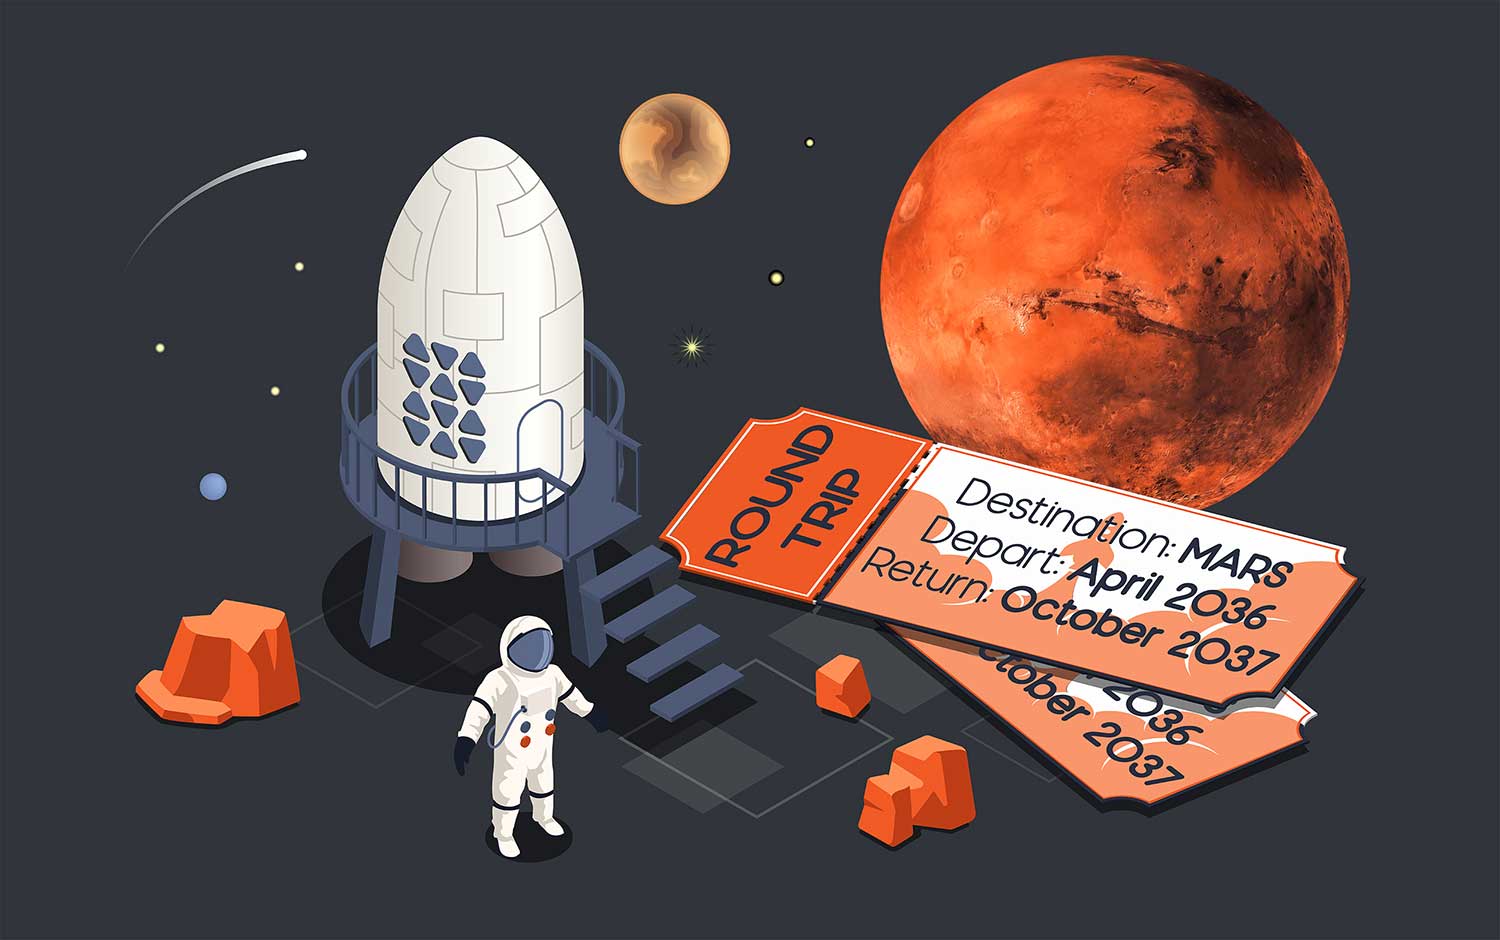 Mockup showing Mars, an astronaut with a space capsule, and roundtrip tickets to Mars departing April 2026 and arriving back October 2027.